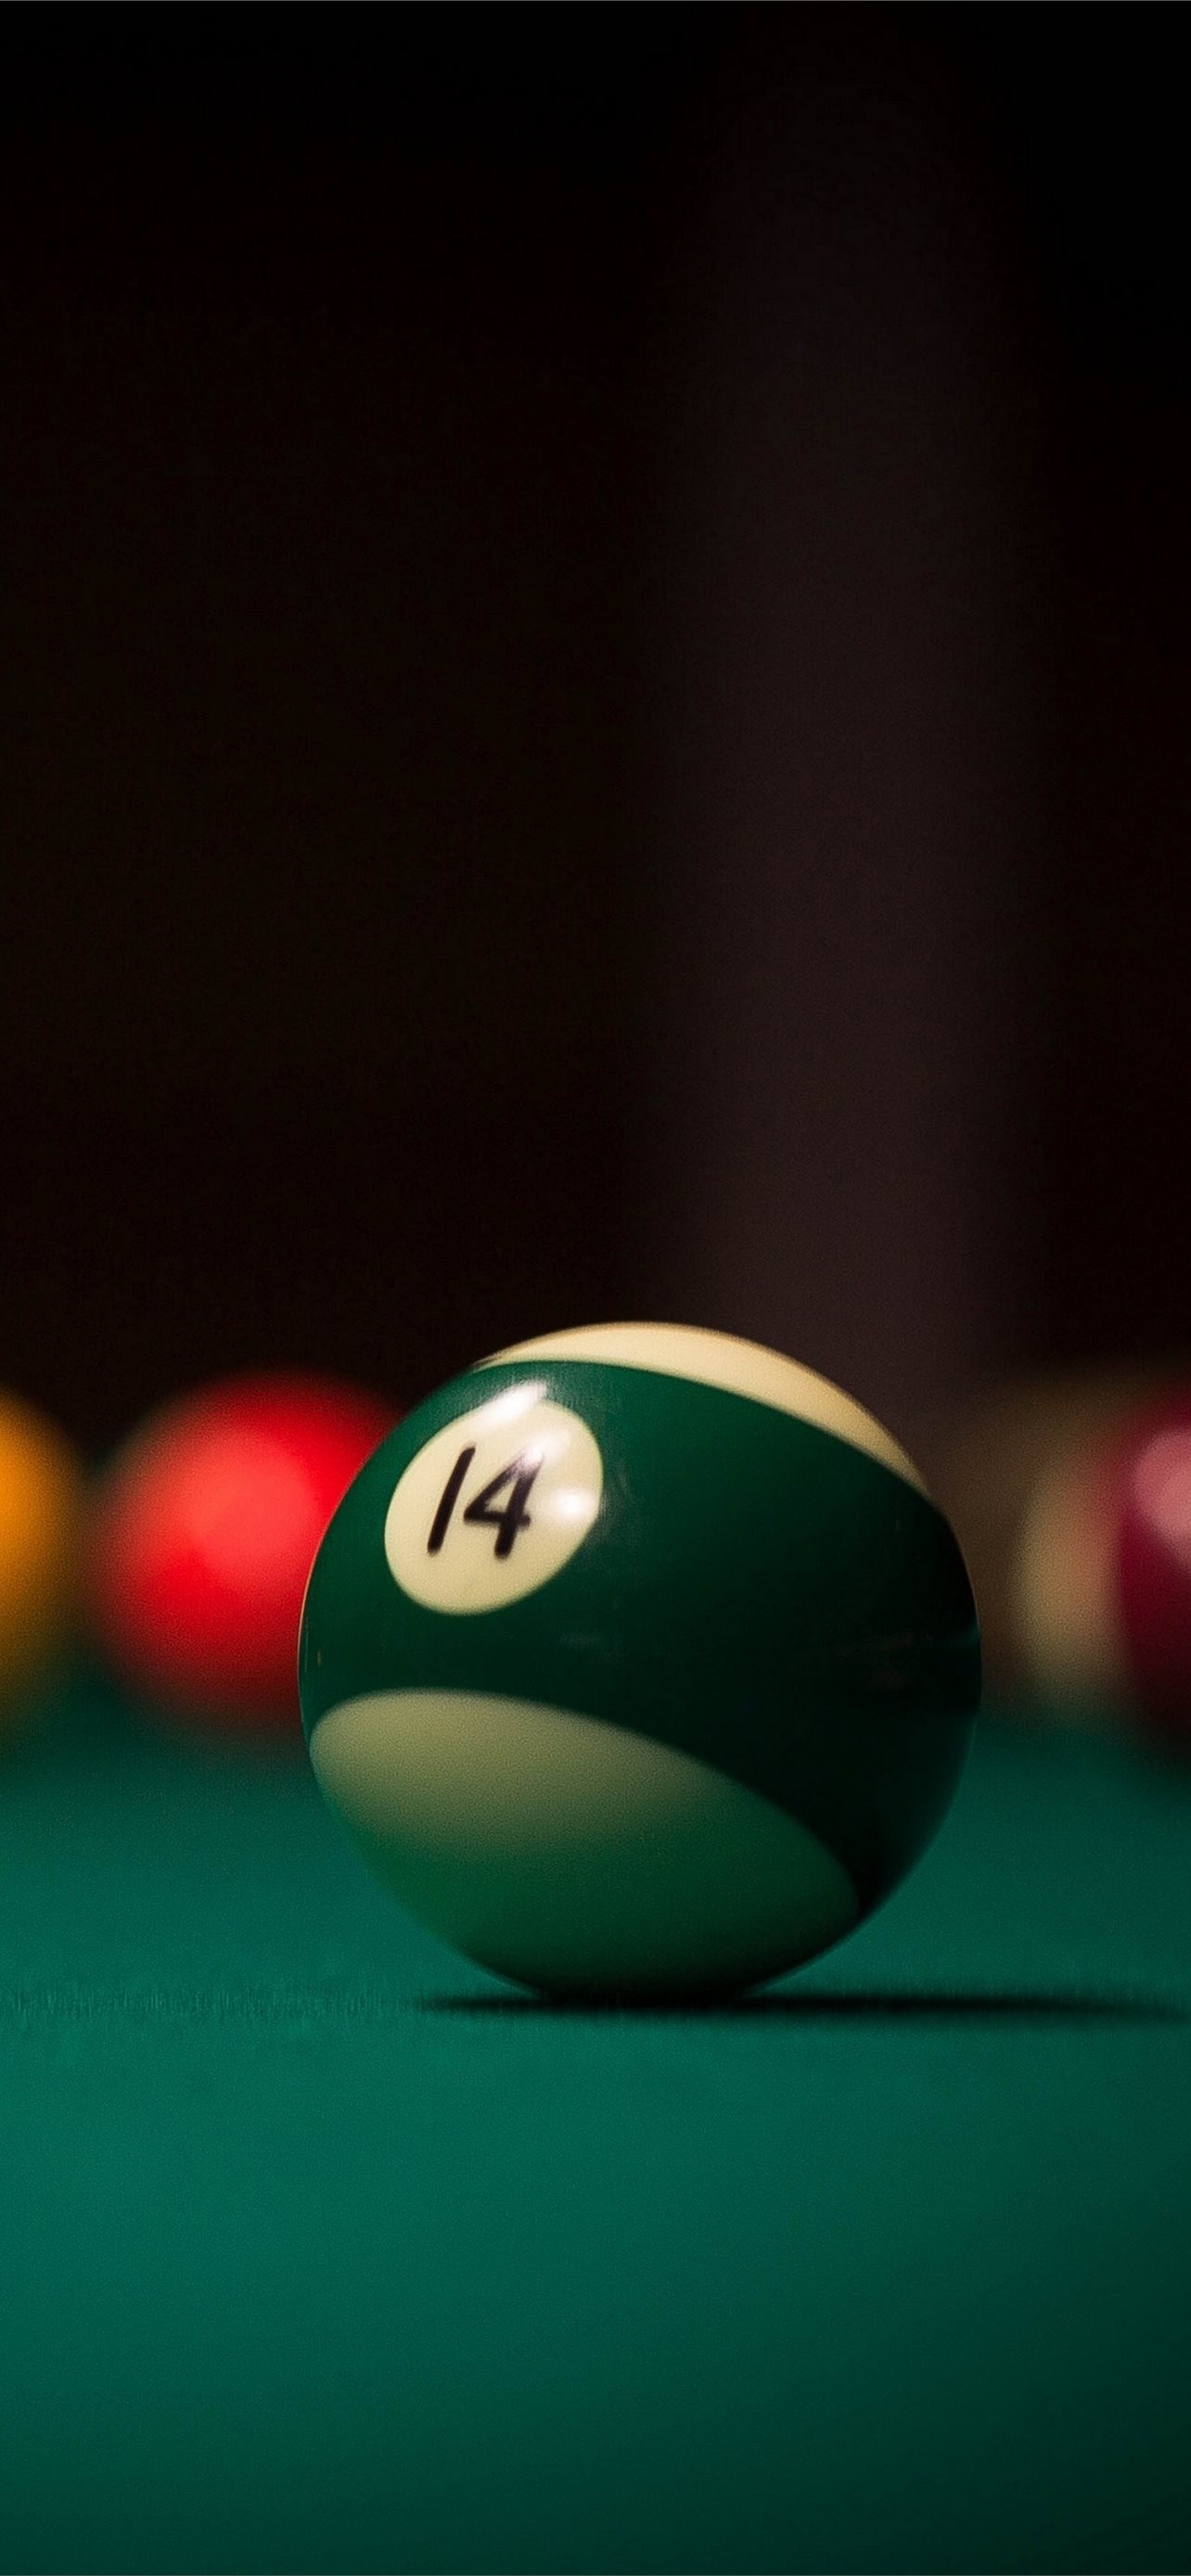 Billiards: An object ball that is supposed to be in a drop pocket in order to get game points, Cue sports. 1290x2780 HD Wallpaper.